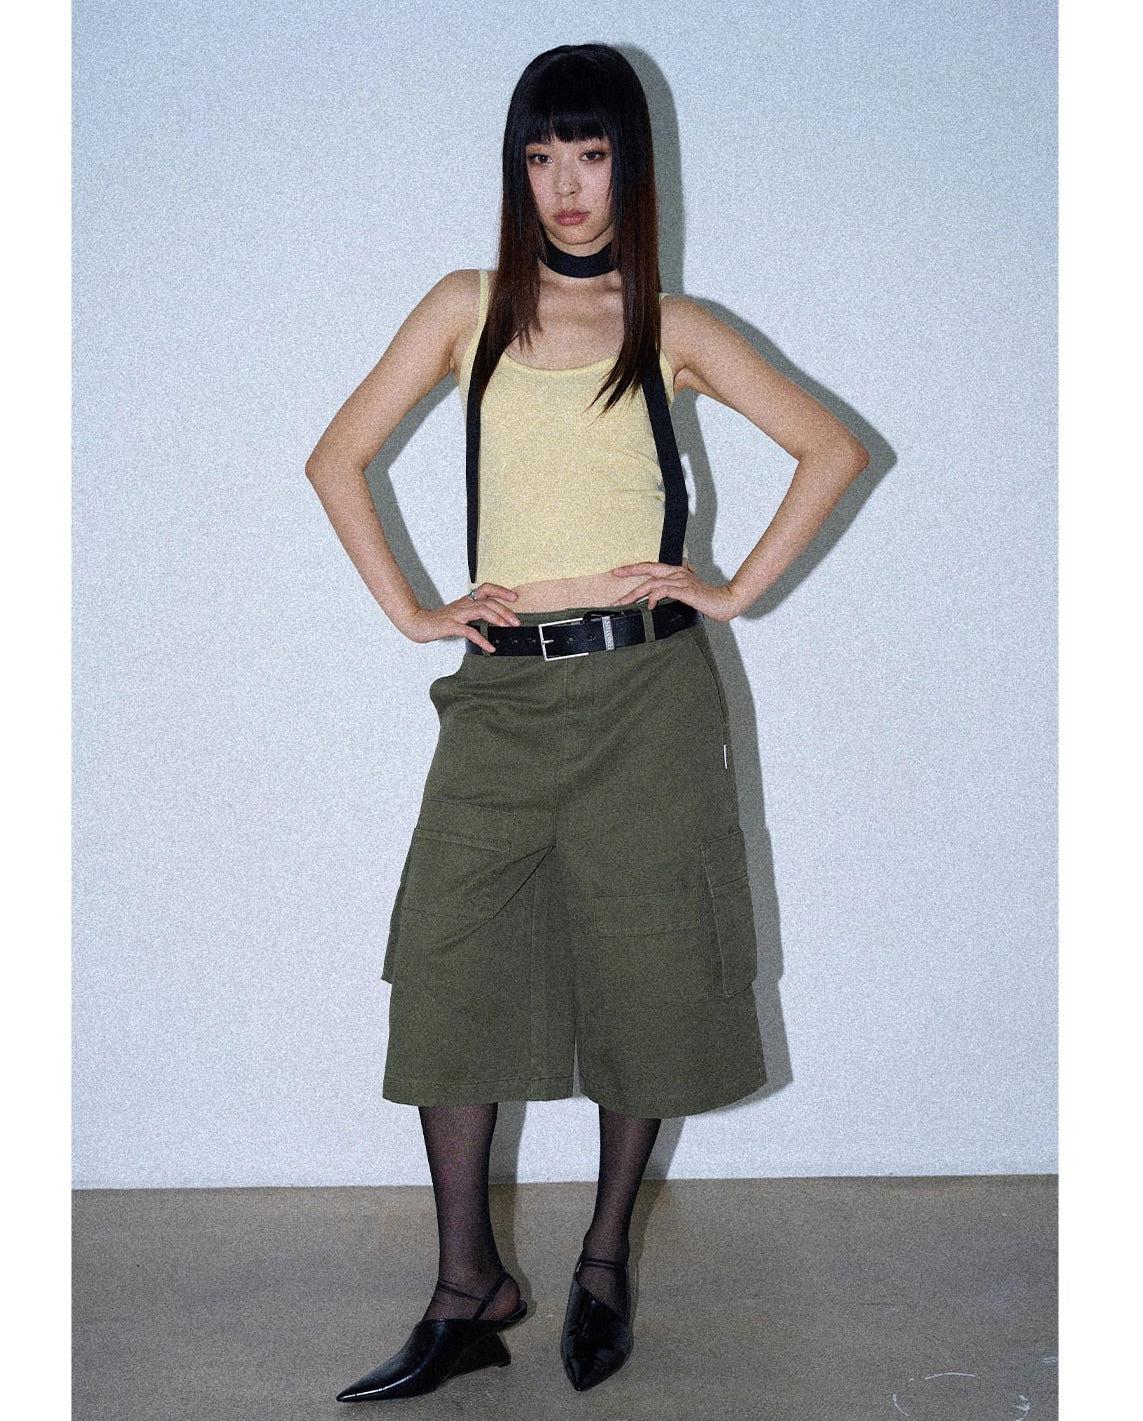 Scattered Flap Pockets Shorts Korean Street Fashion Shorts By Funky Fun Shop Online at OH Vault